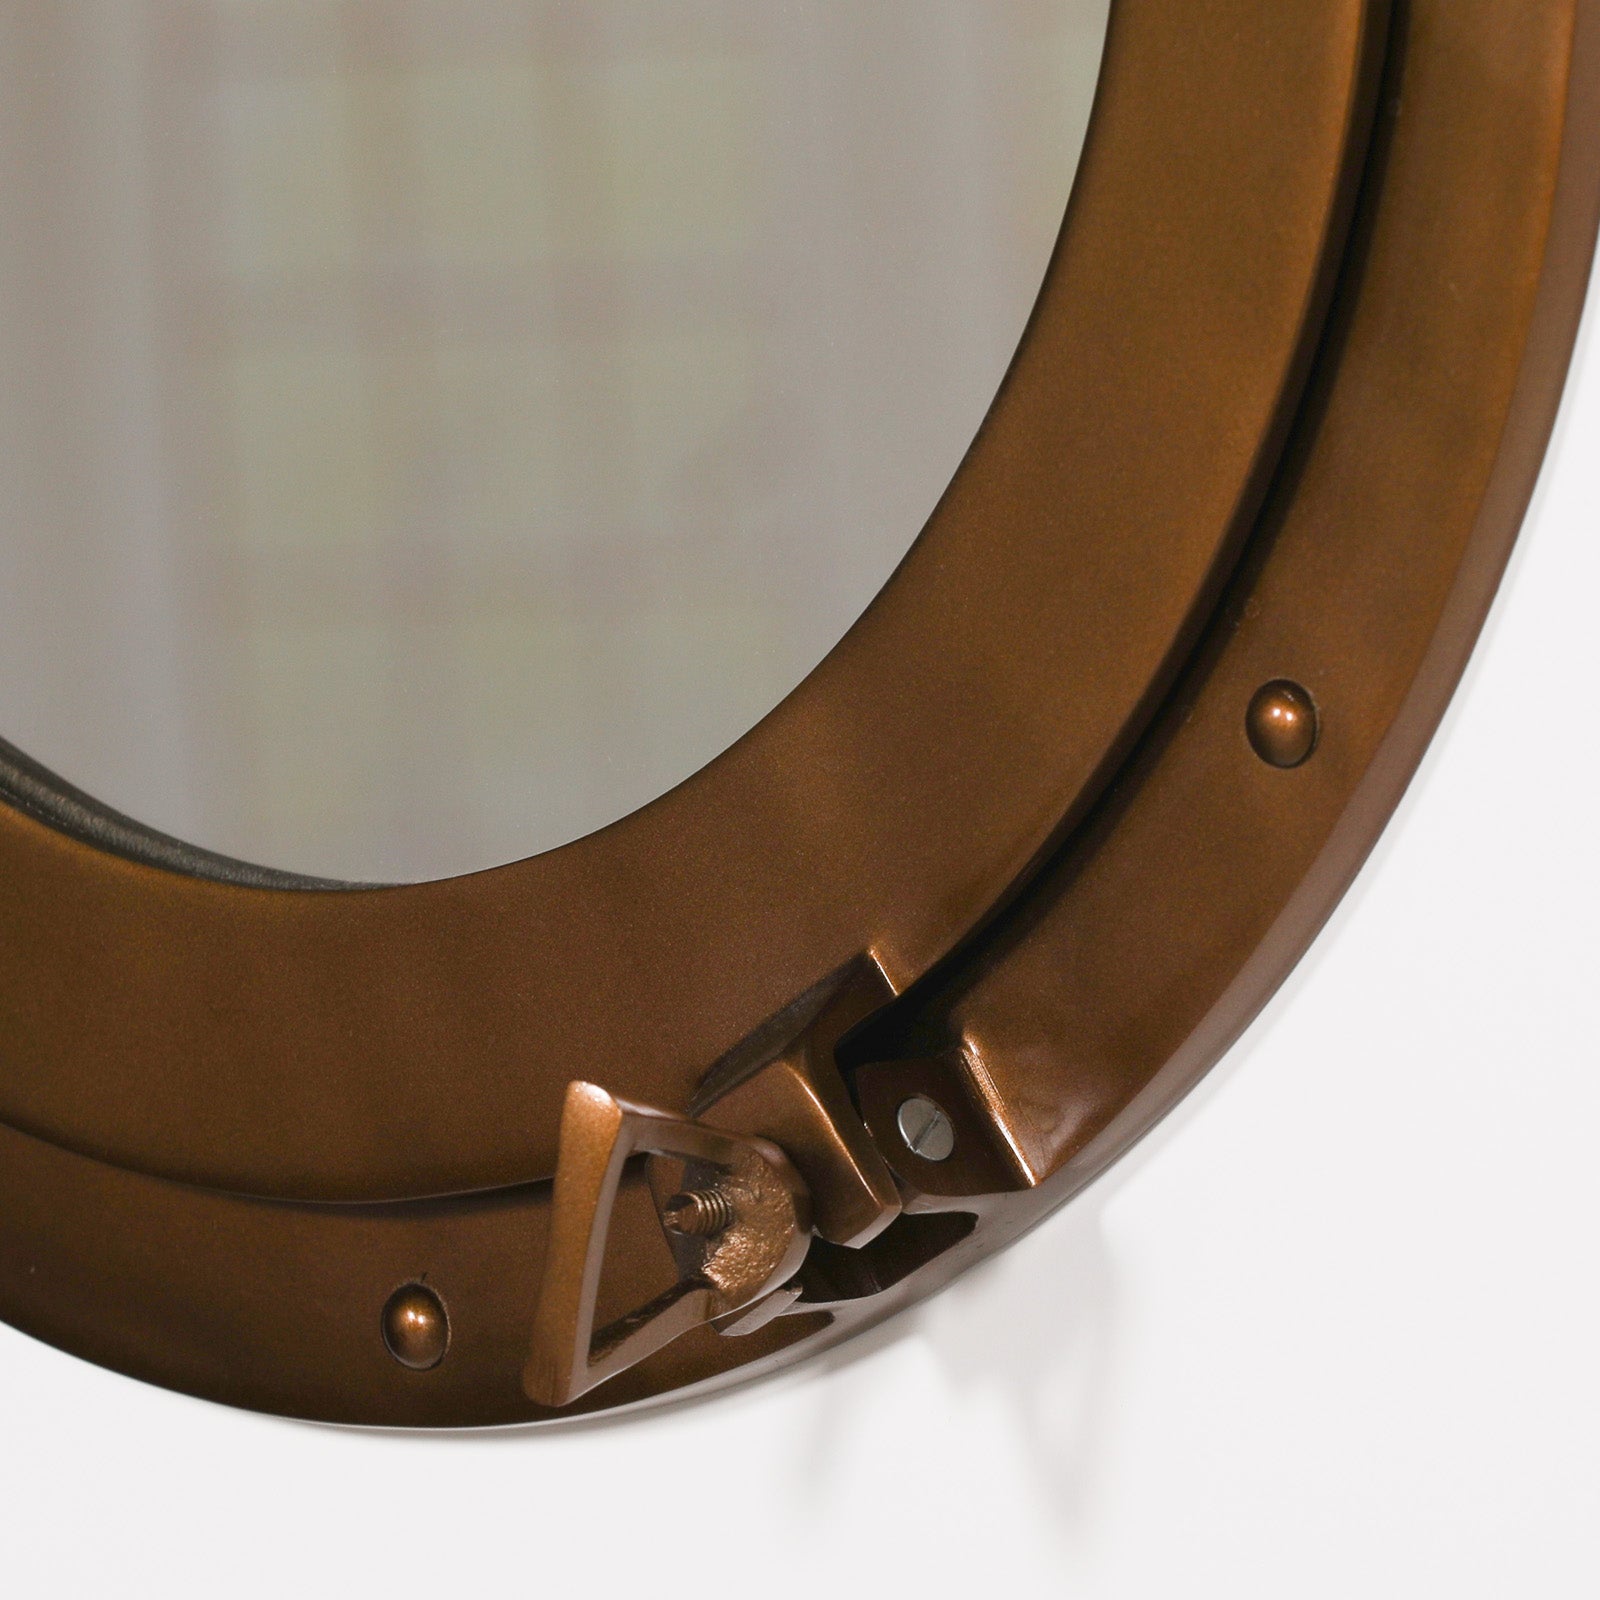 Large Antiqued Brass Style Port Hole Mirror